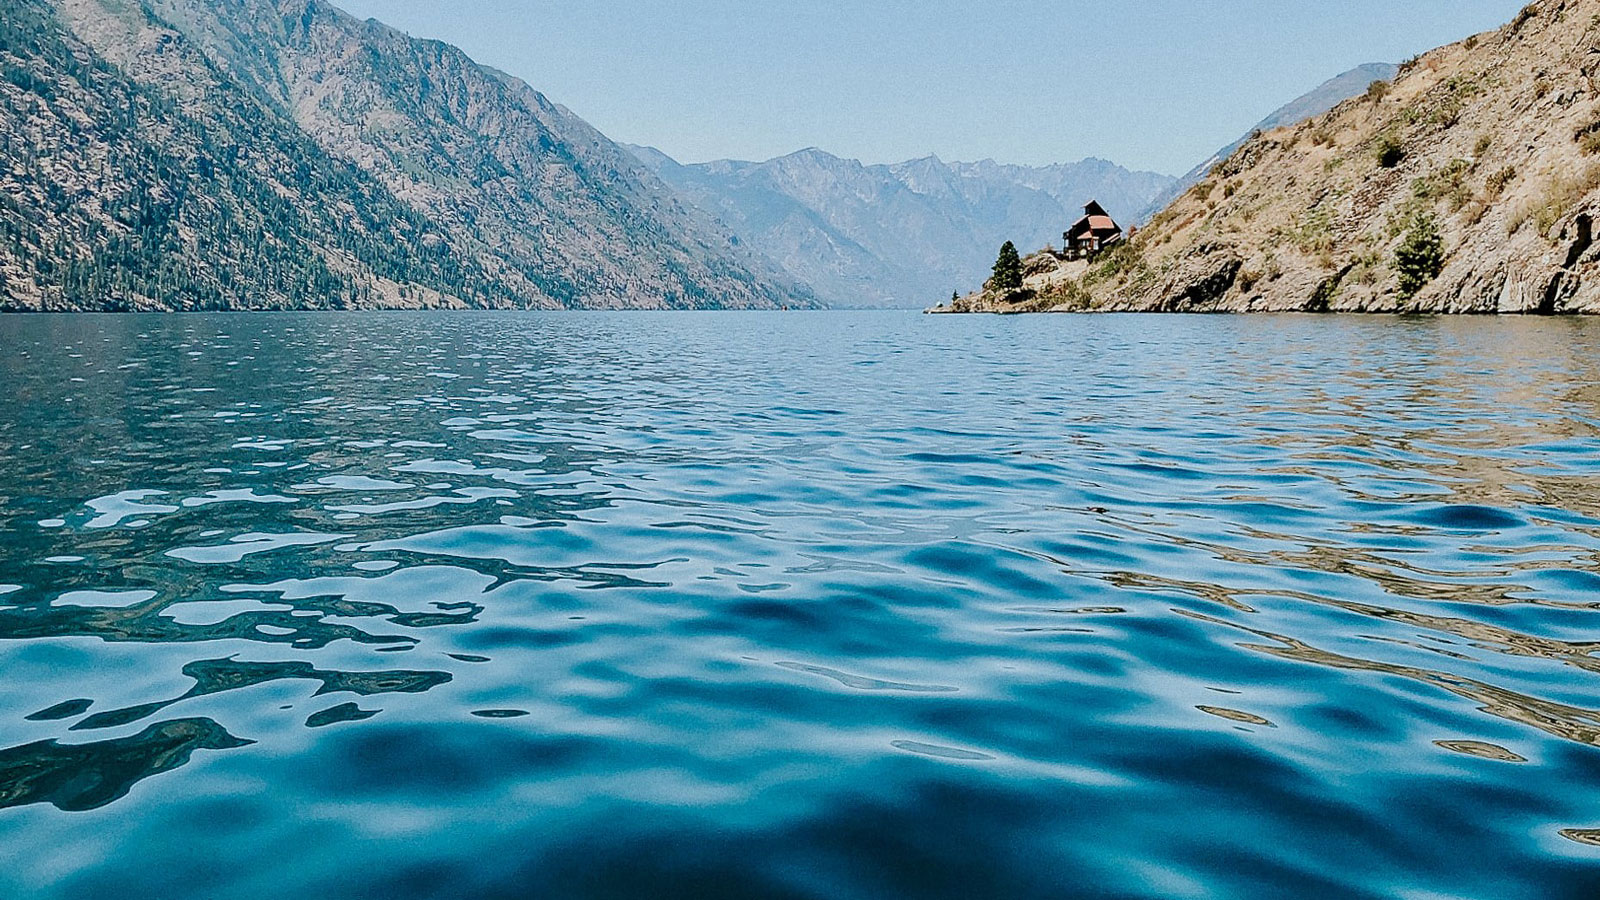 Keep It Blue campaign releases Lake Chelan water quality report